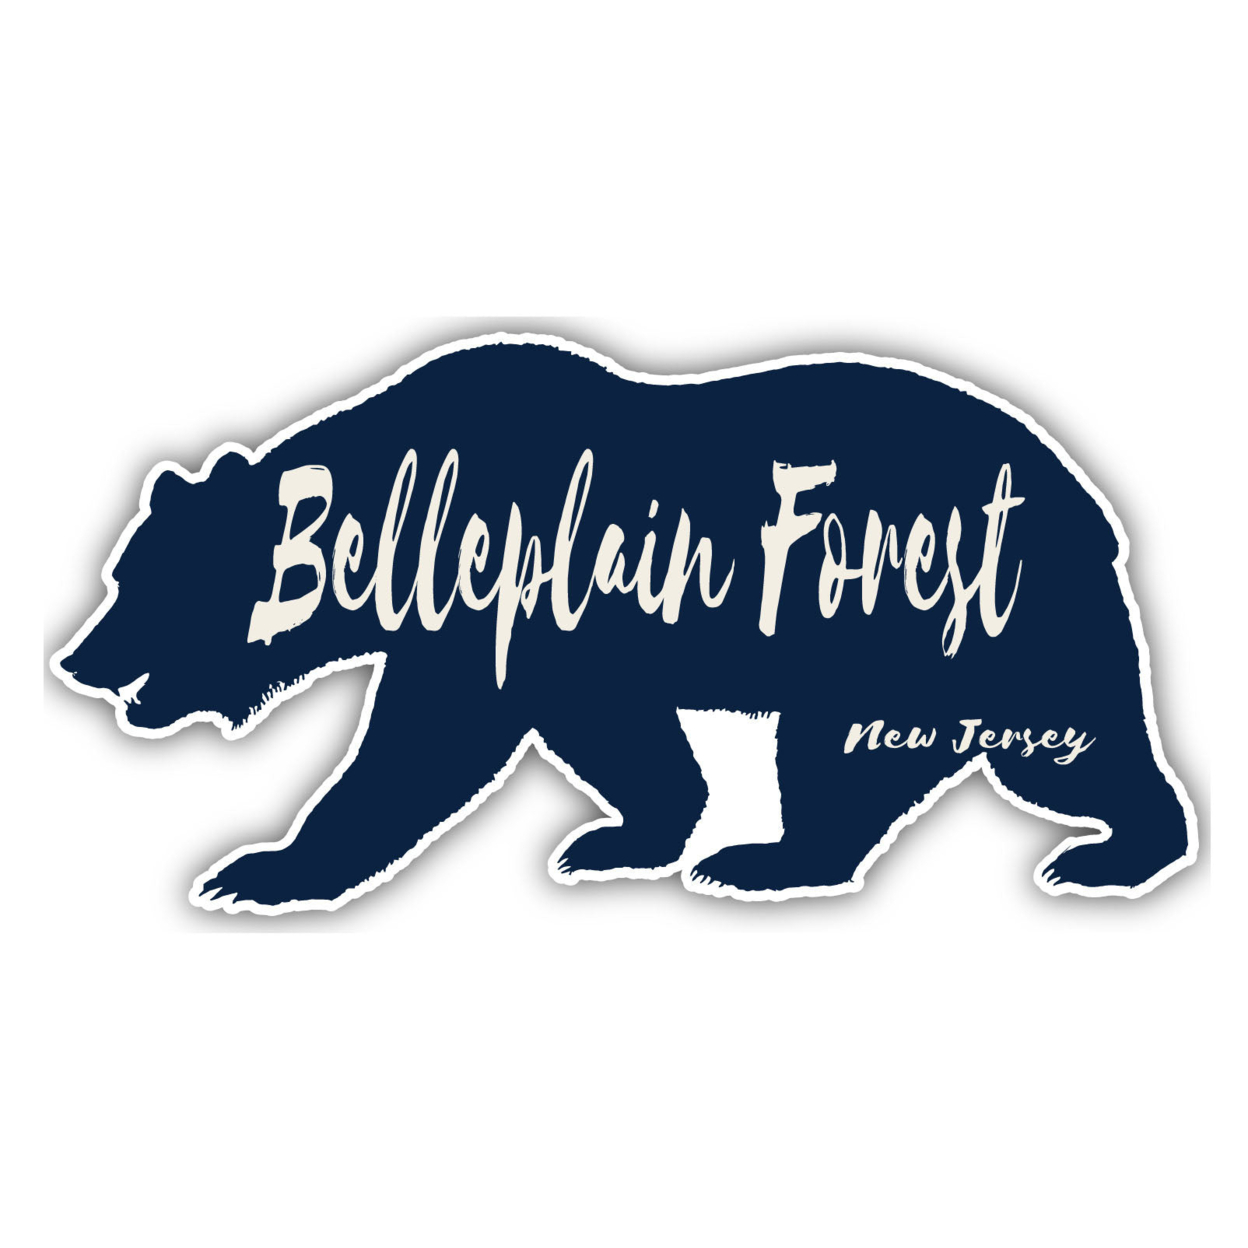 Belleplain Forest New Jersey Souvenir Decorative Stickers (Choose Theme And Size) - 4-Pack, 2-Inch, Bear